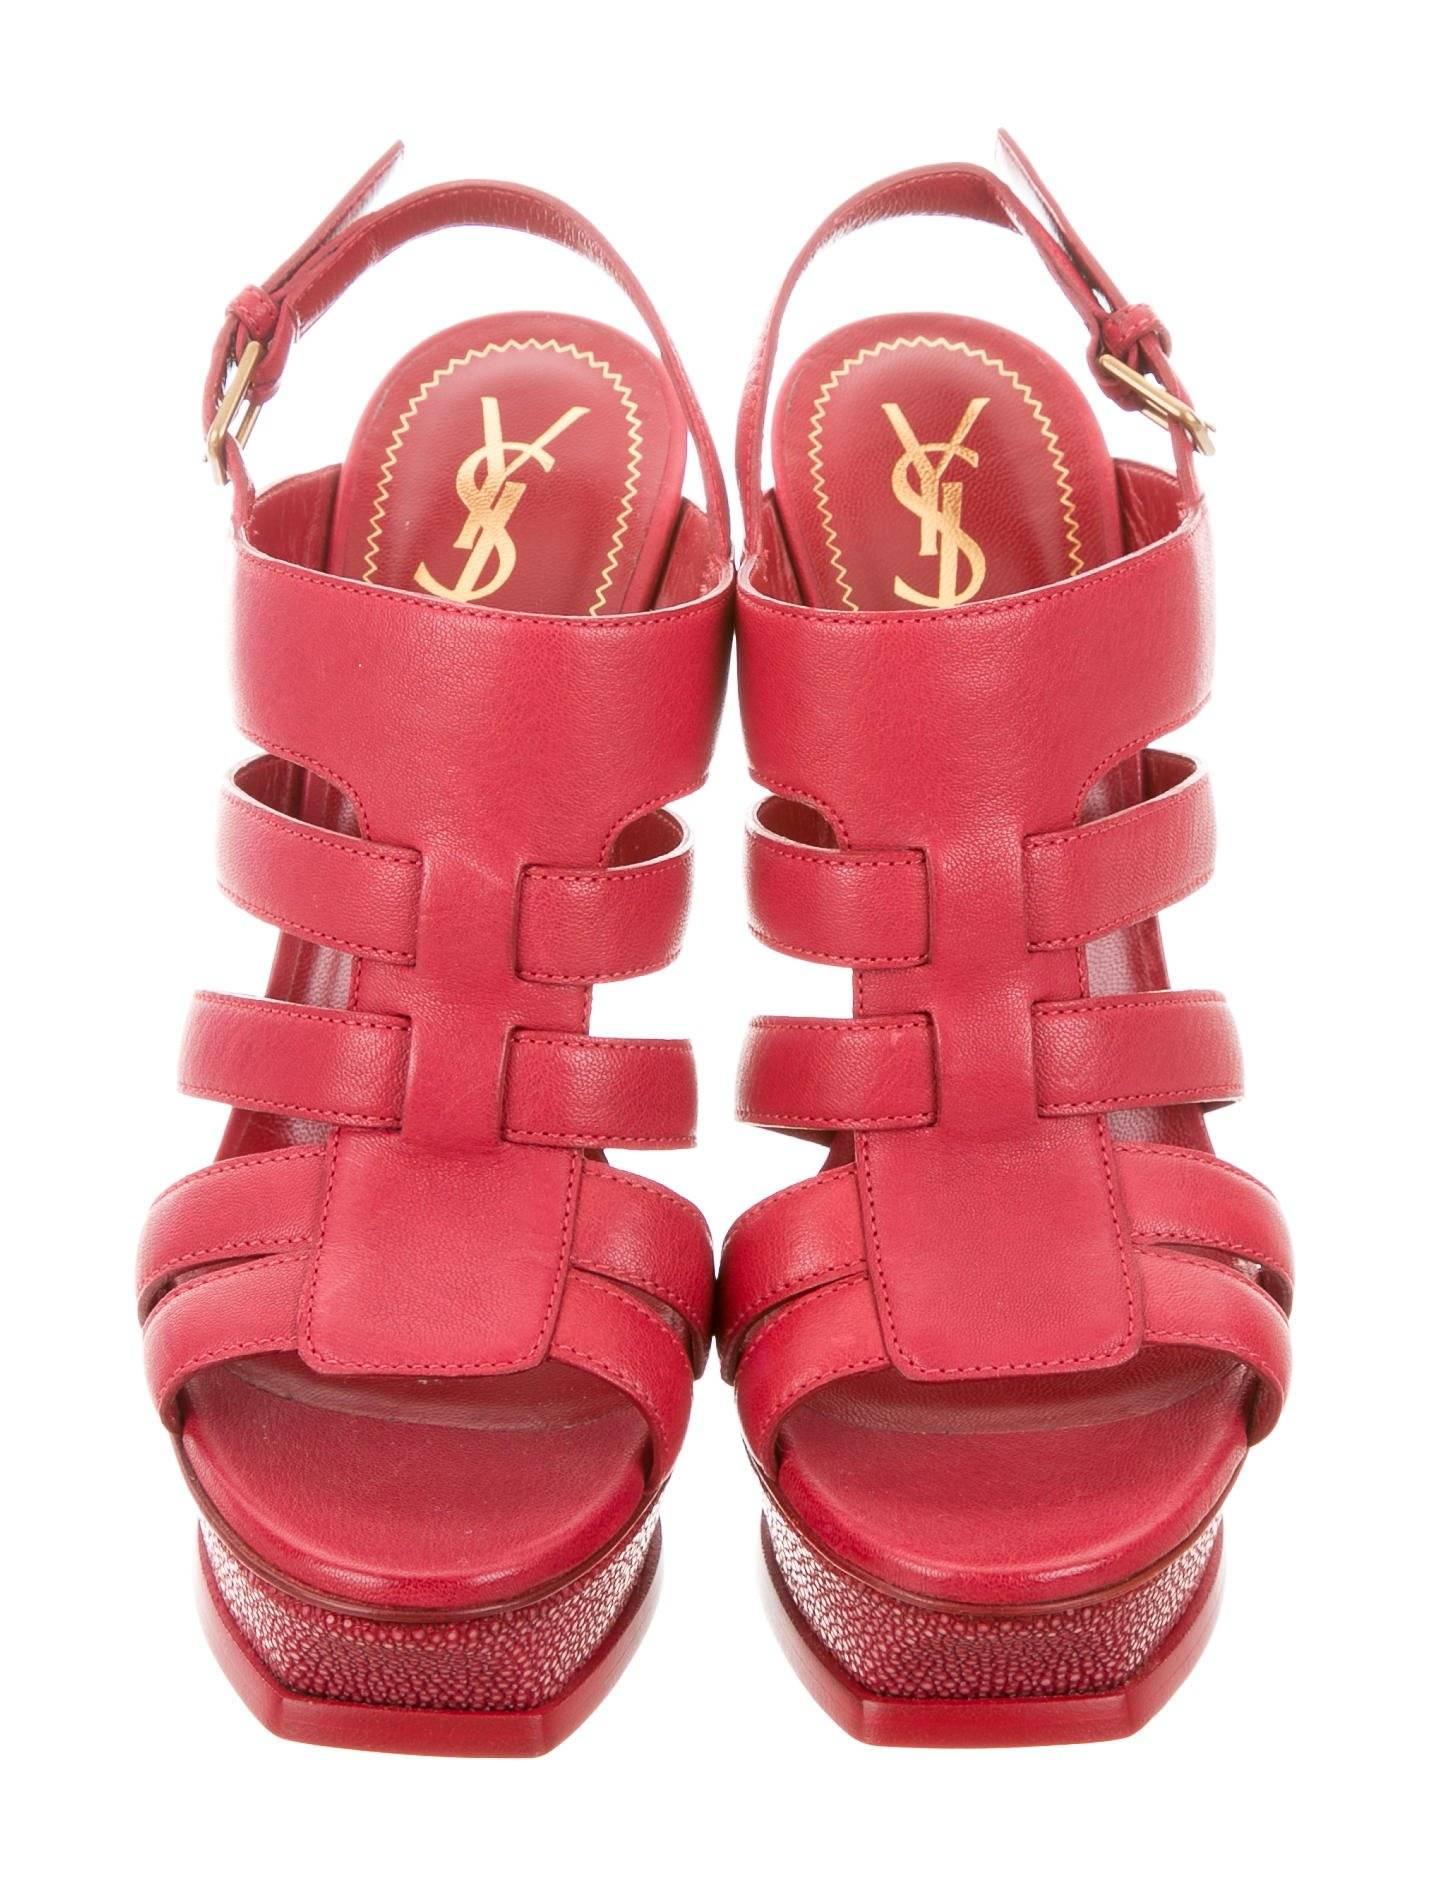 YSL New Red Leather Shark Leather Trim Evening Sandals Heels in Box In New Condition In Chicago, IL